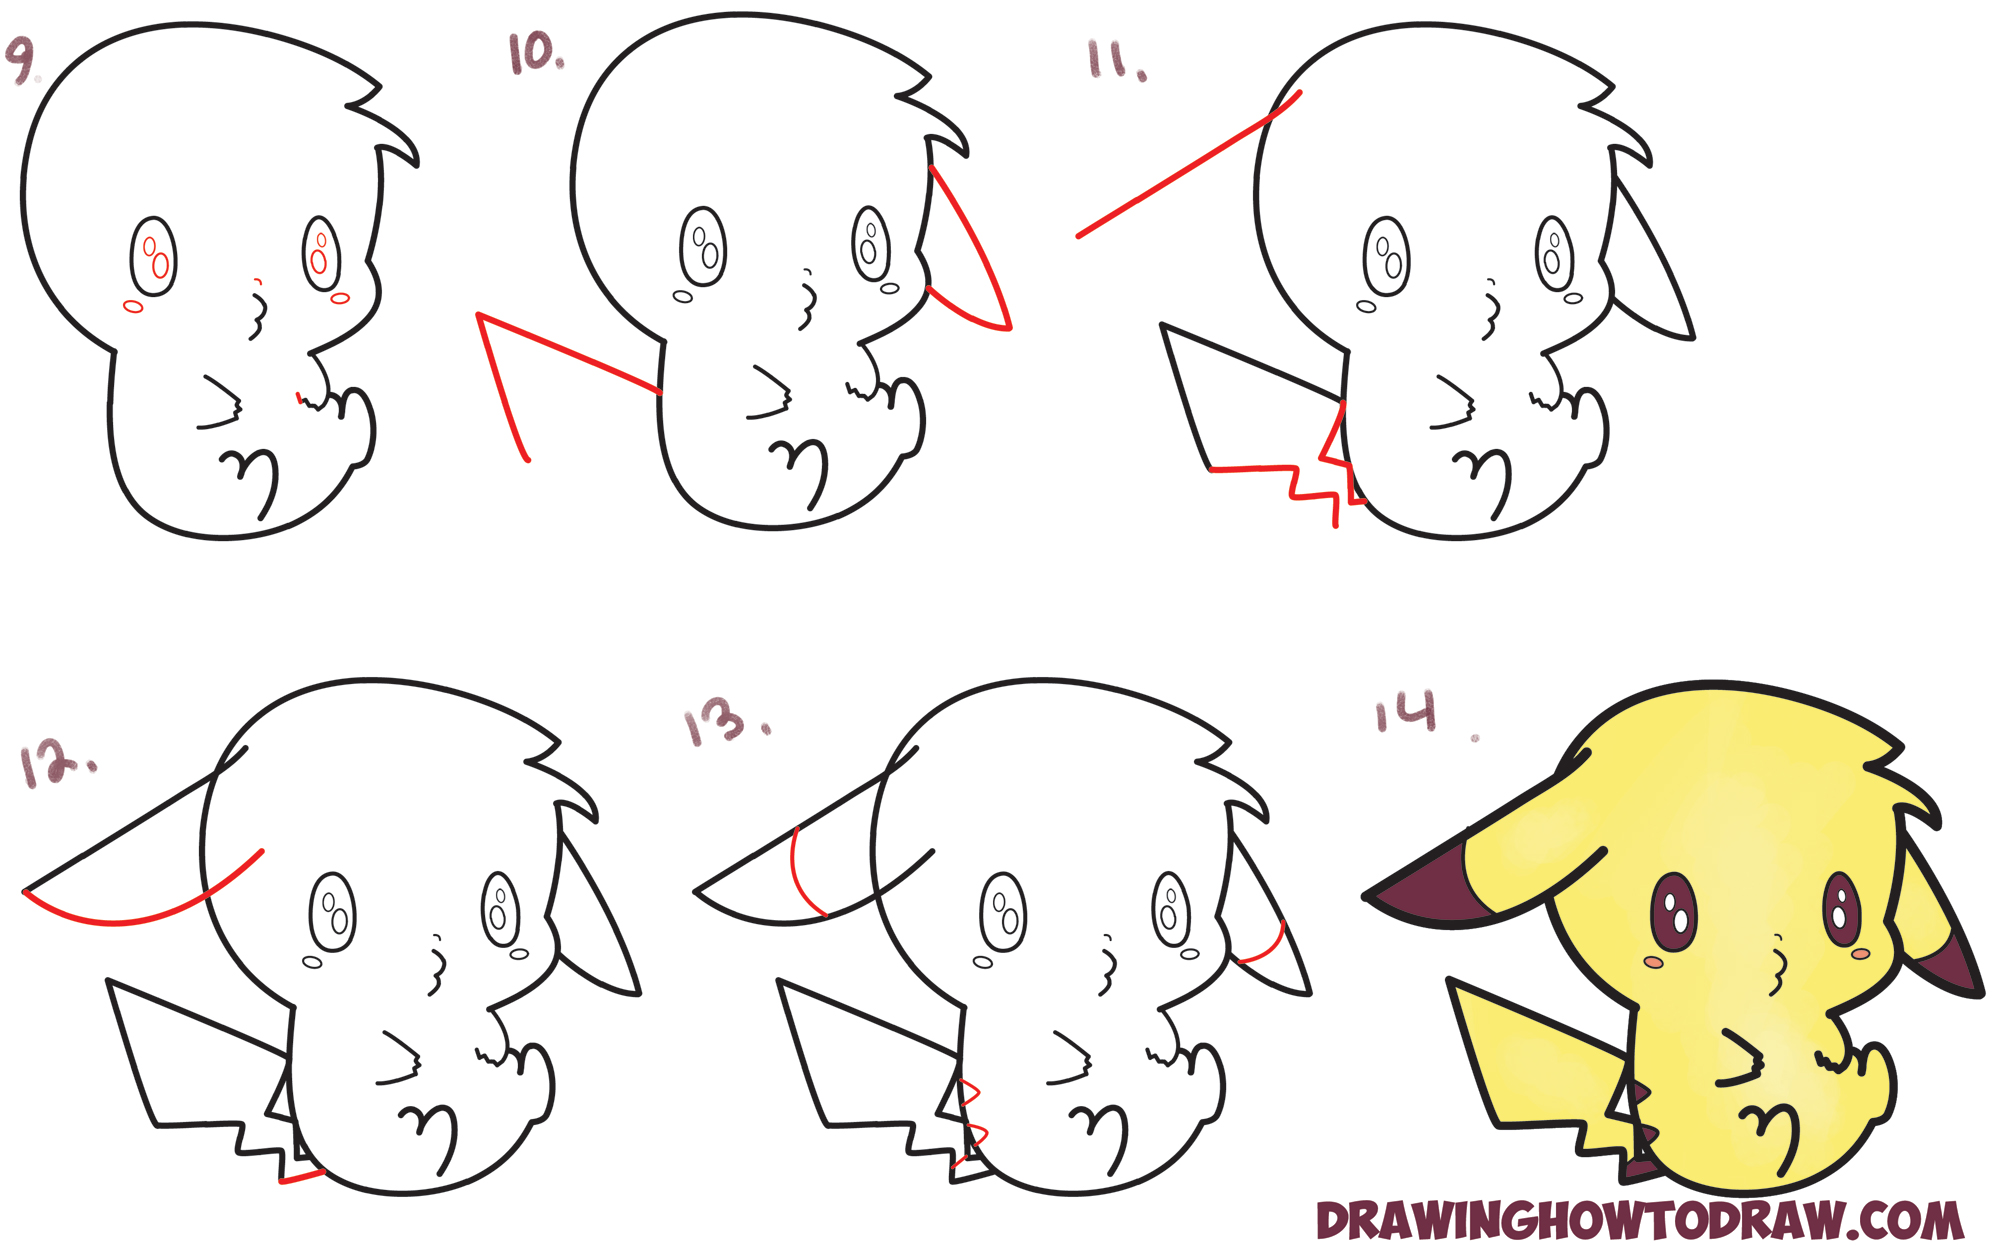 Learn How to Draw an Adorable Pikachu (Kawaii / Chibi) Easy Step by